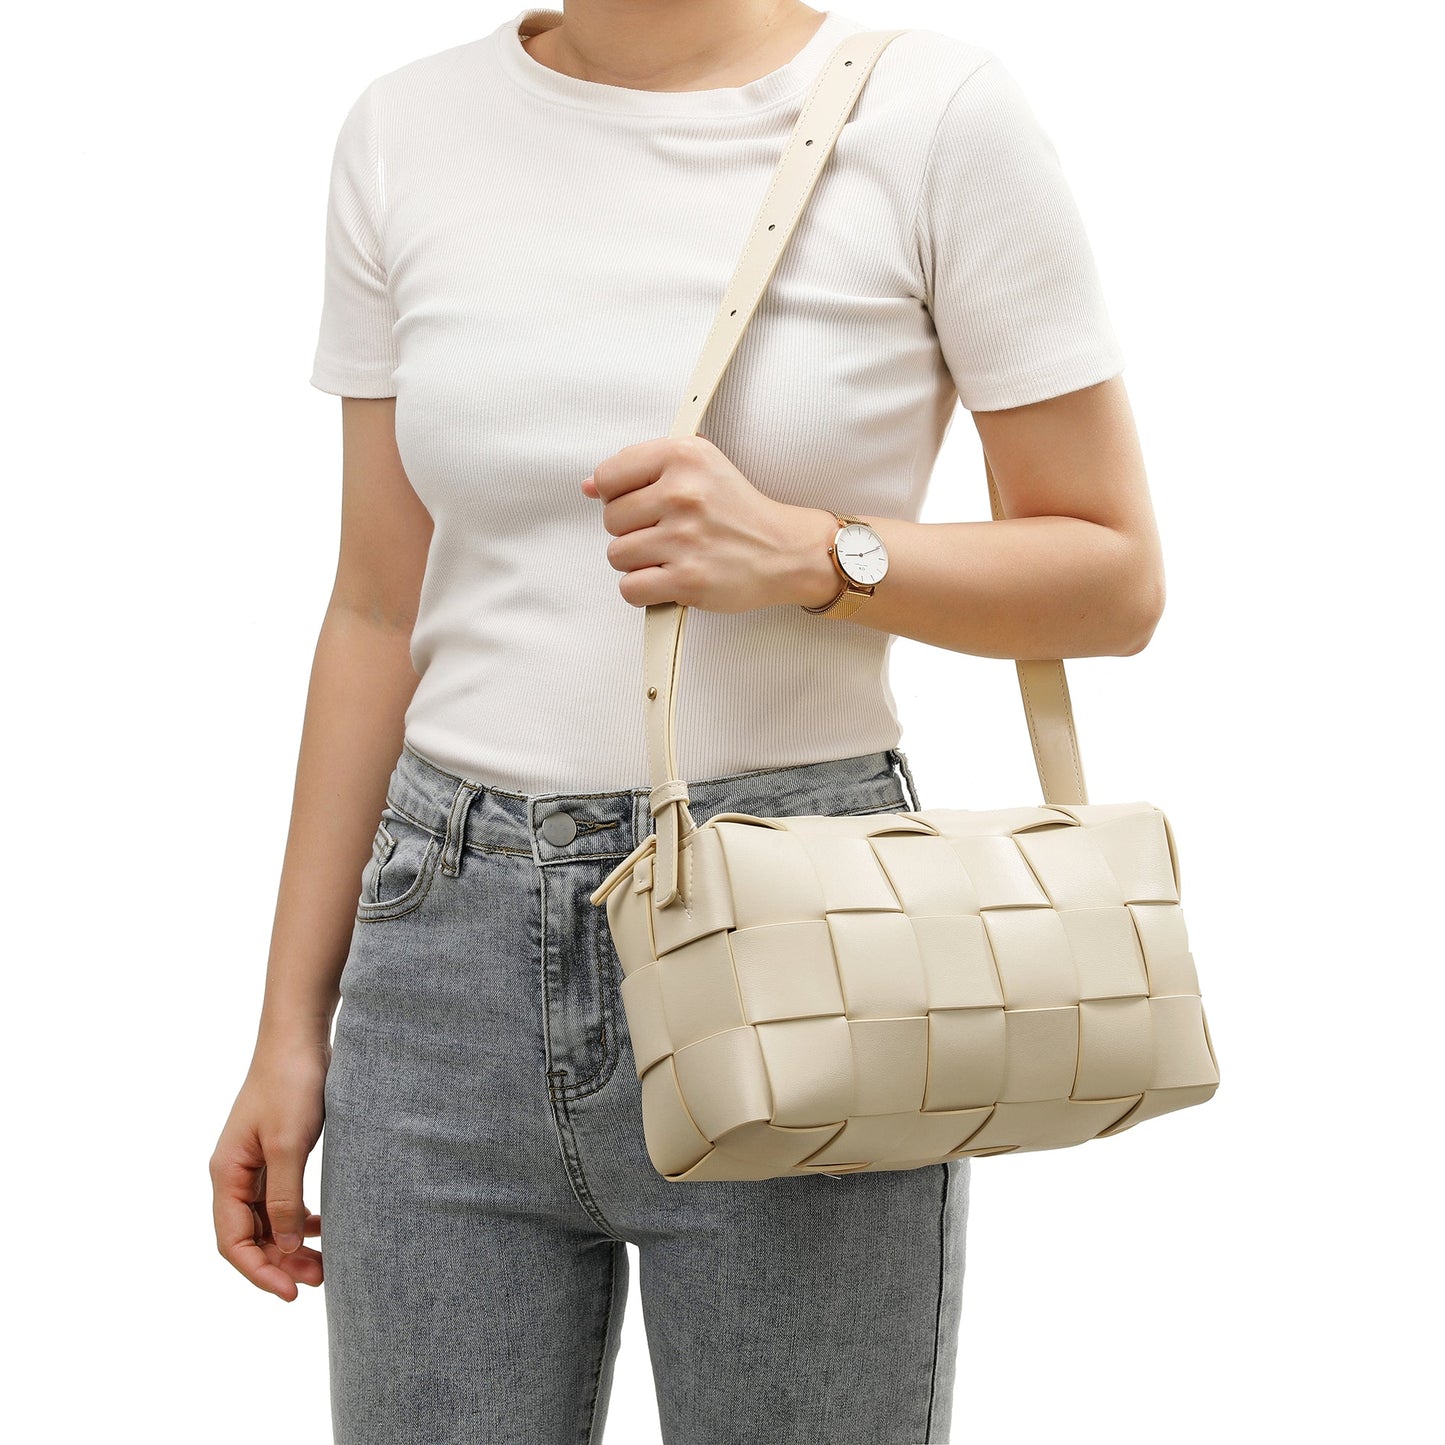 Smooth Woven Leather Hobo/Shoulder